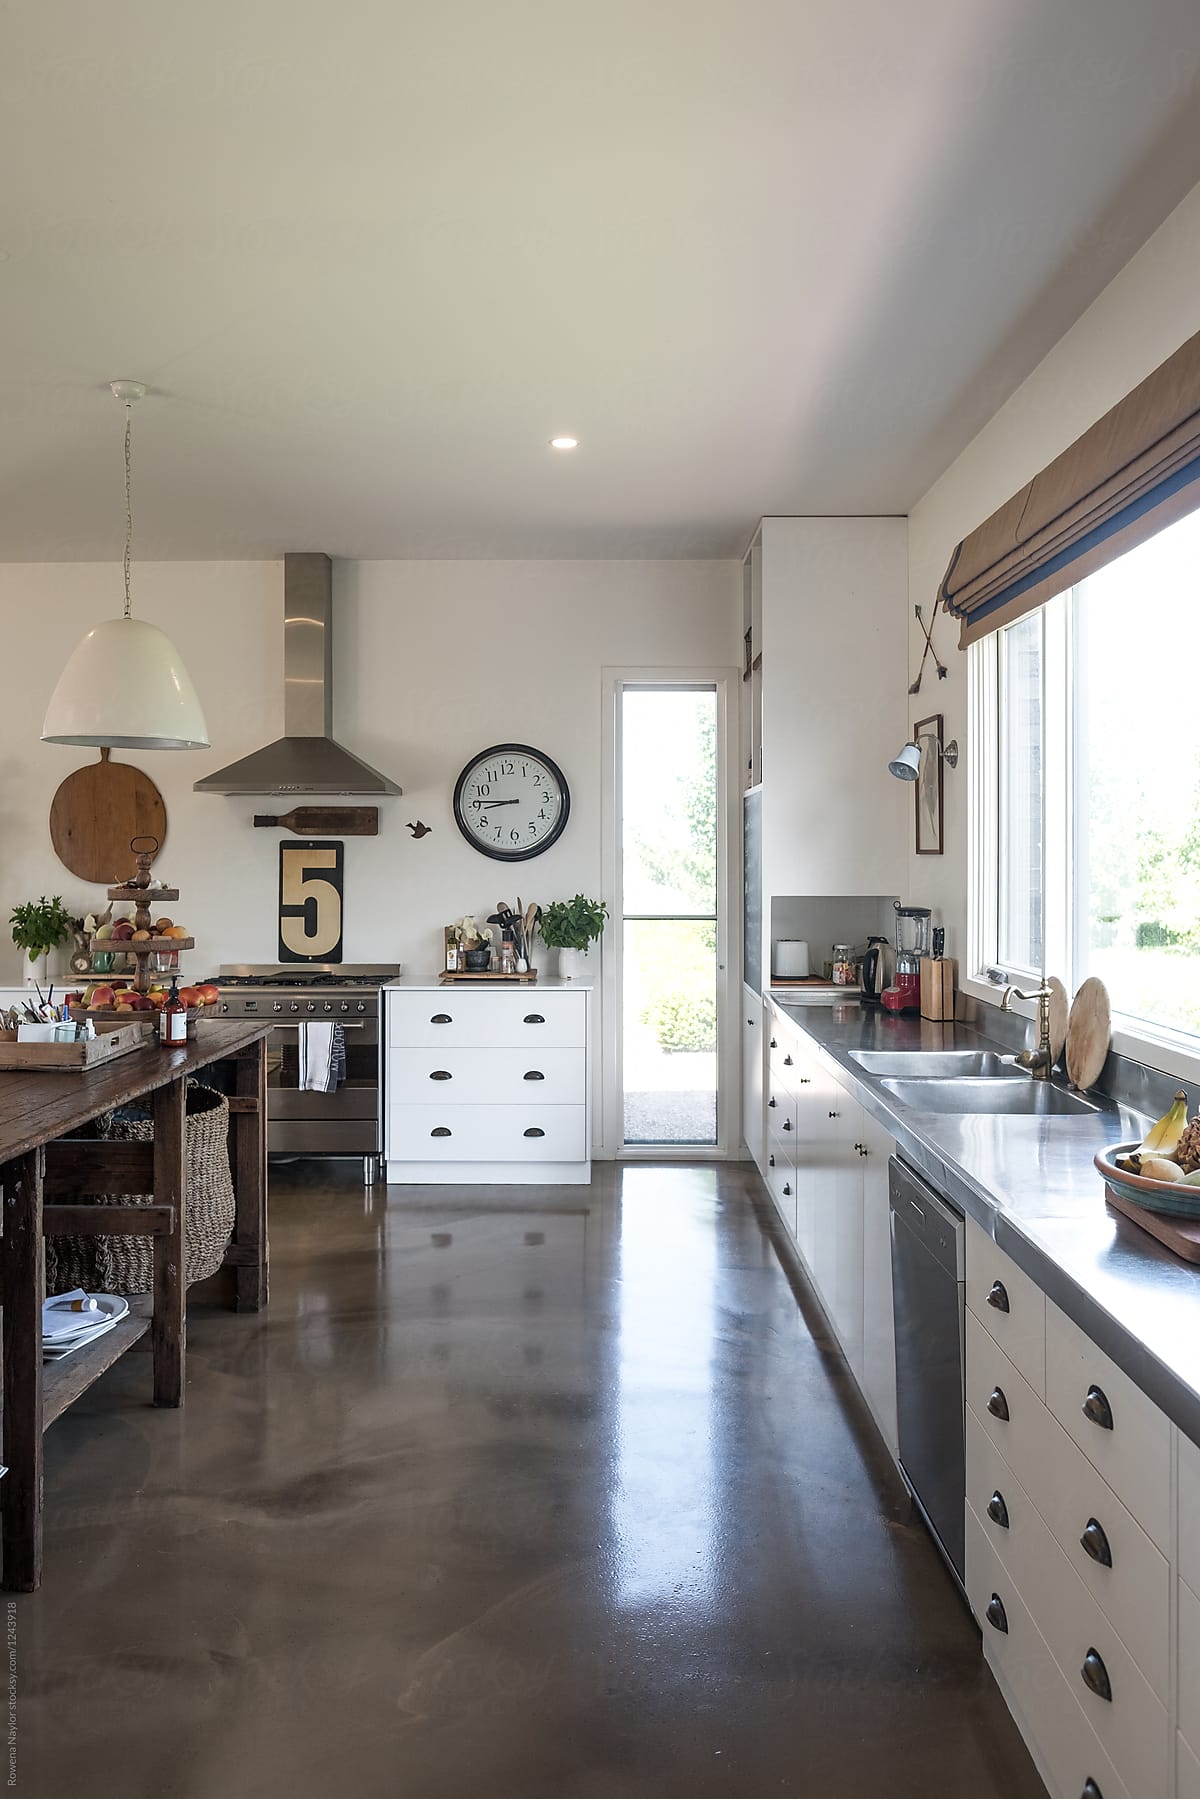 Styled Kitchen With Polished Concrete Flooring By Rowena Naylor